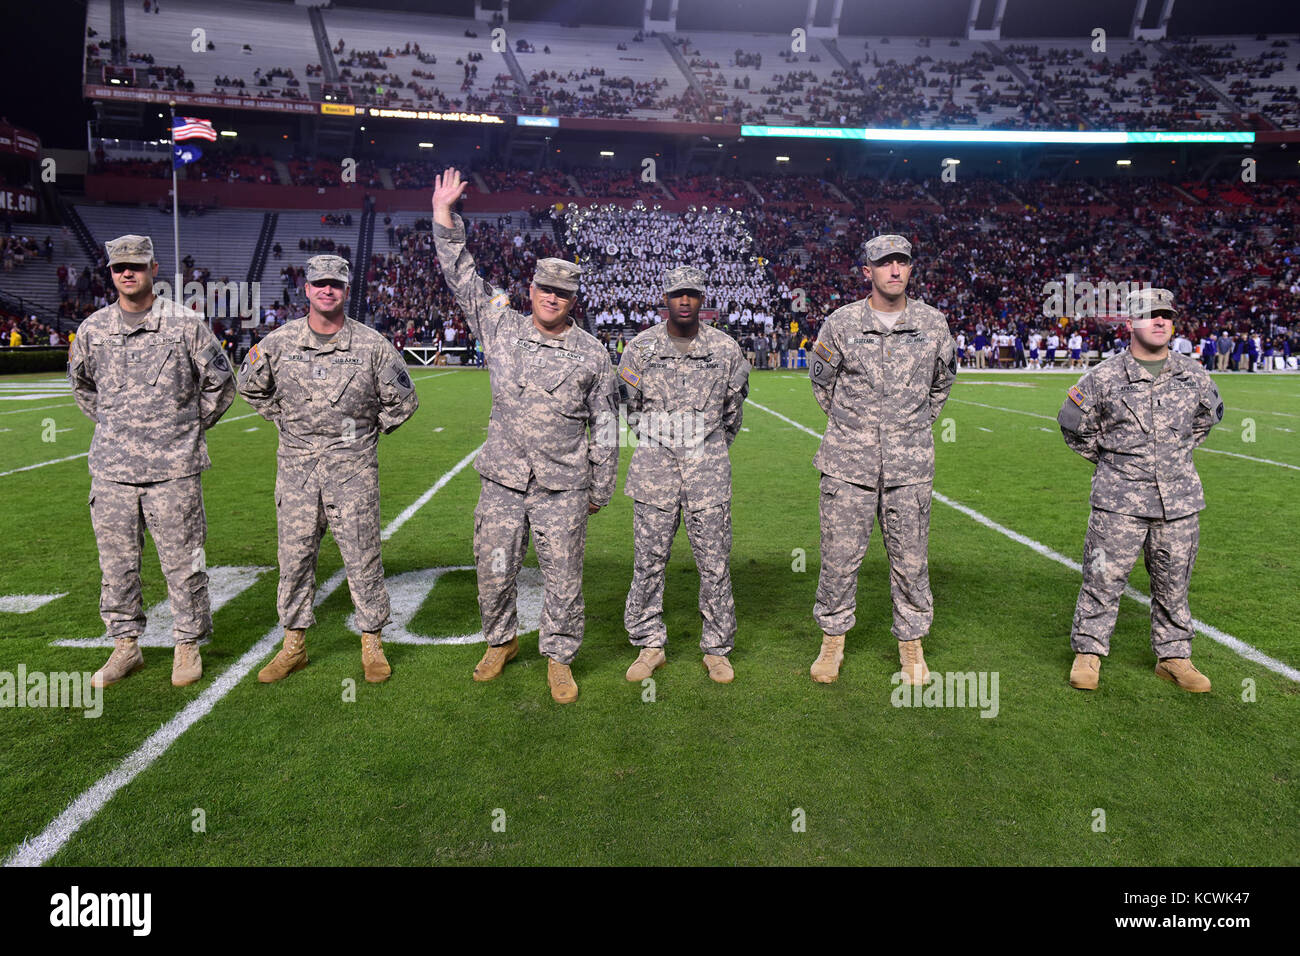 U.S. Army Chief Warrant Officer 5 Russell Nance, South Carolina National Guard, 1-151st Attack Reconnaissance Battalion UH-64 Apache pilot, receives recognition at Williams-Brice stadium in Columbia, South Carolina, Nov. 19, 2016. The South Carolina Army National Guard conducted a fly-over in support of Fort Jackson's participation in the University of South Carolina's military appreciation game. (U.S. Air National Guard photo by Airman 1st Class Megan Floyd) Stock Photo